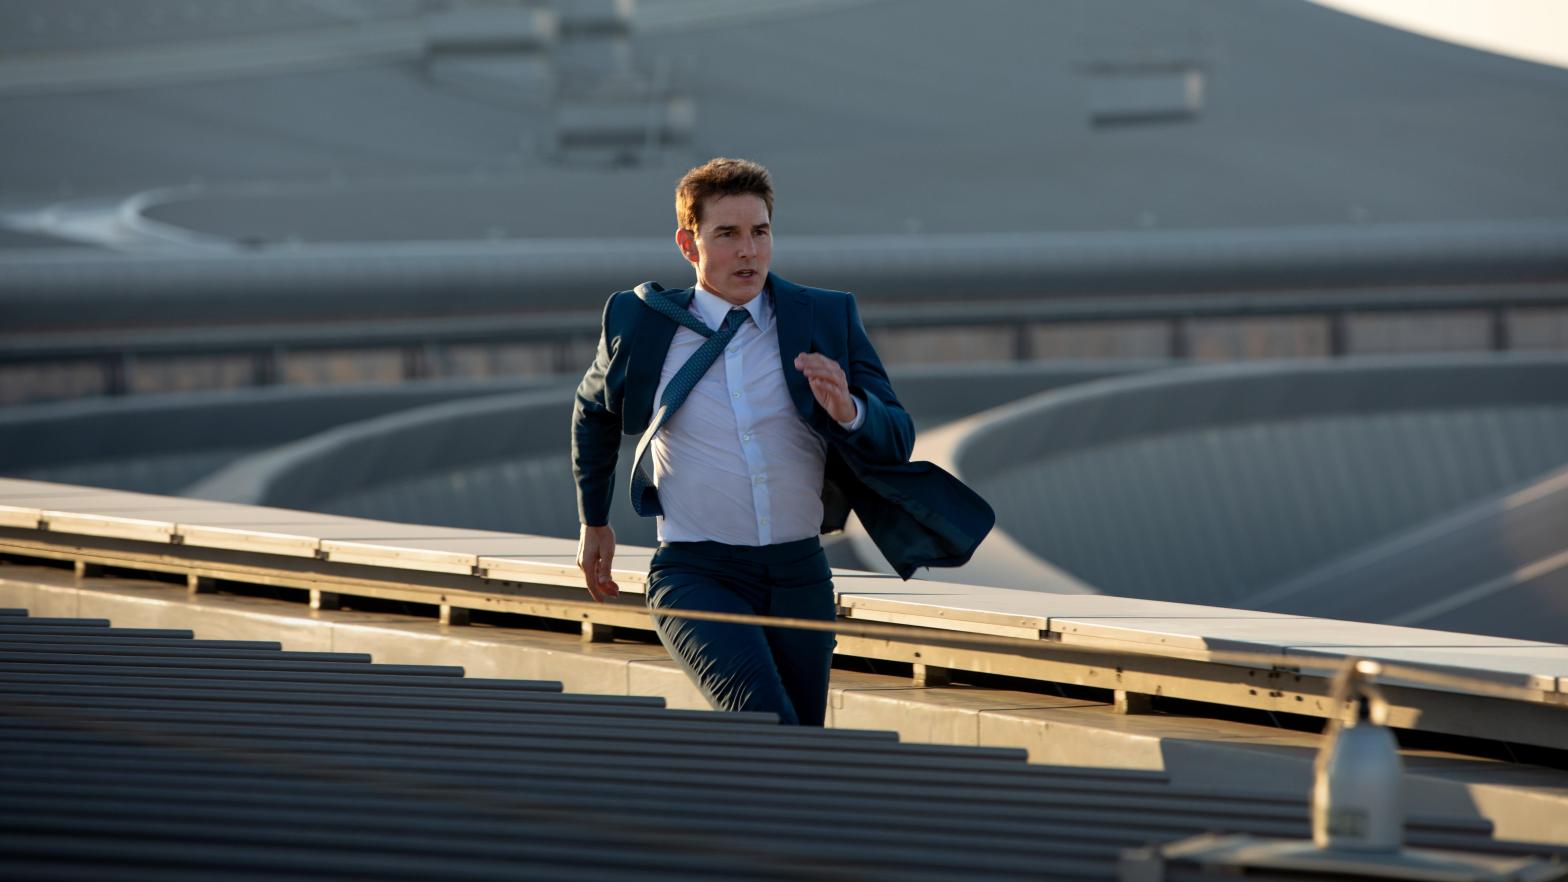 Cruise cruisin' in Mission: Impossible - Dead Reckoning Part One (Image: Paramount Pictures and Skydance)